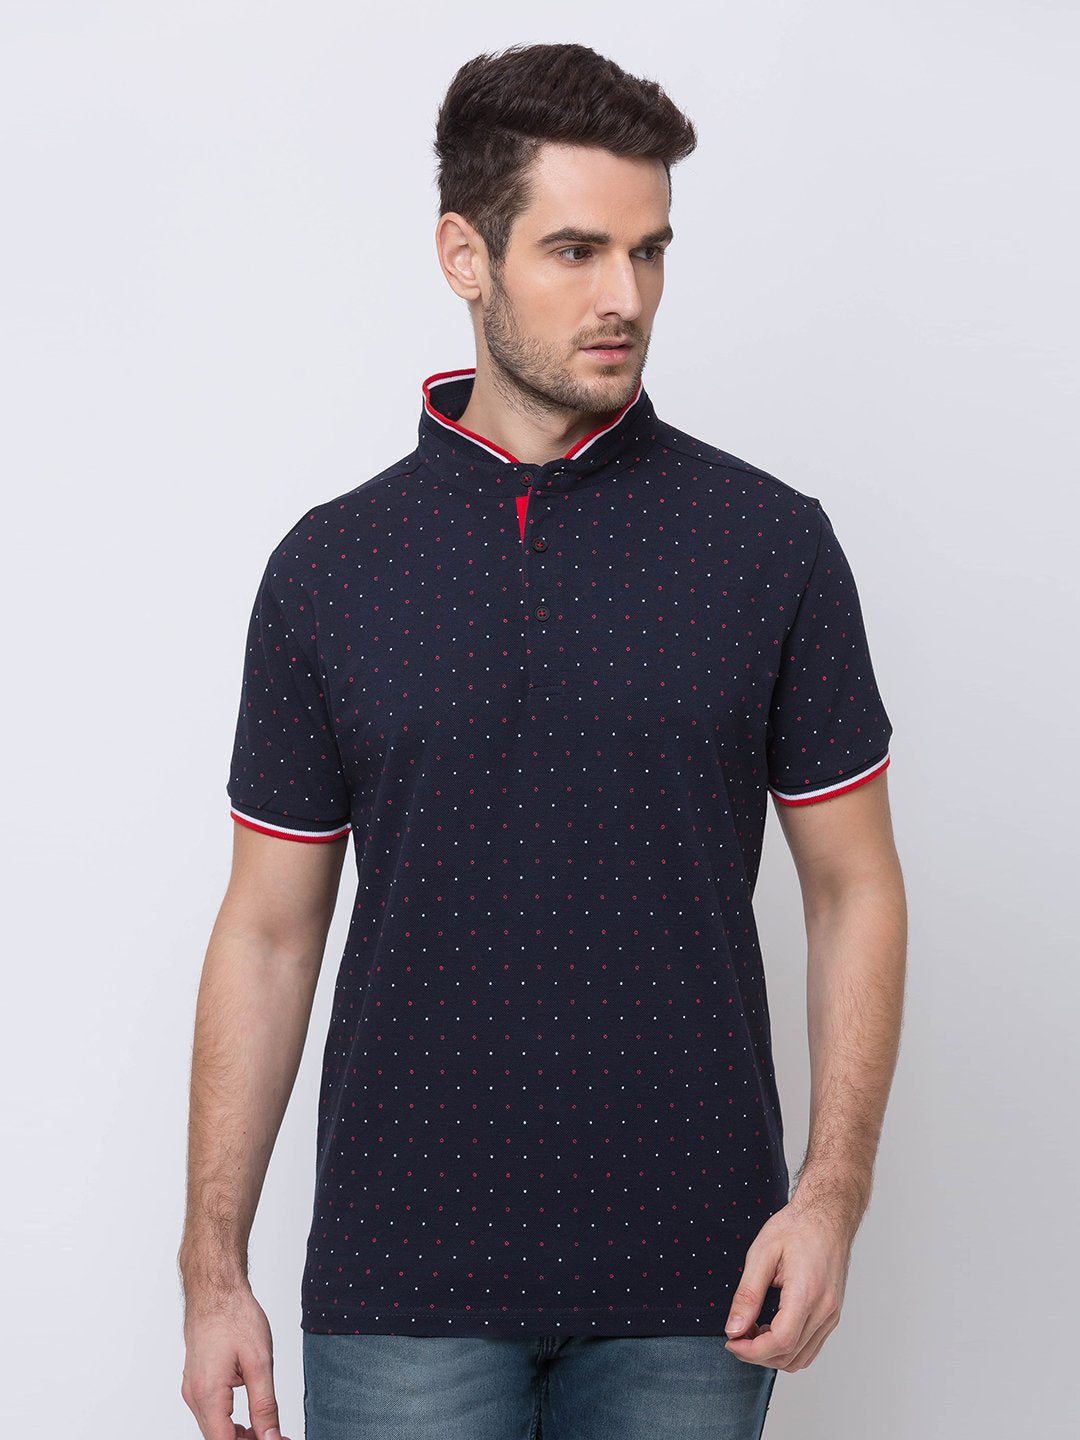 solid polo t shirt